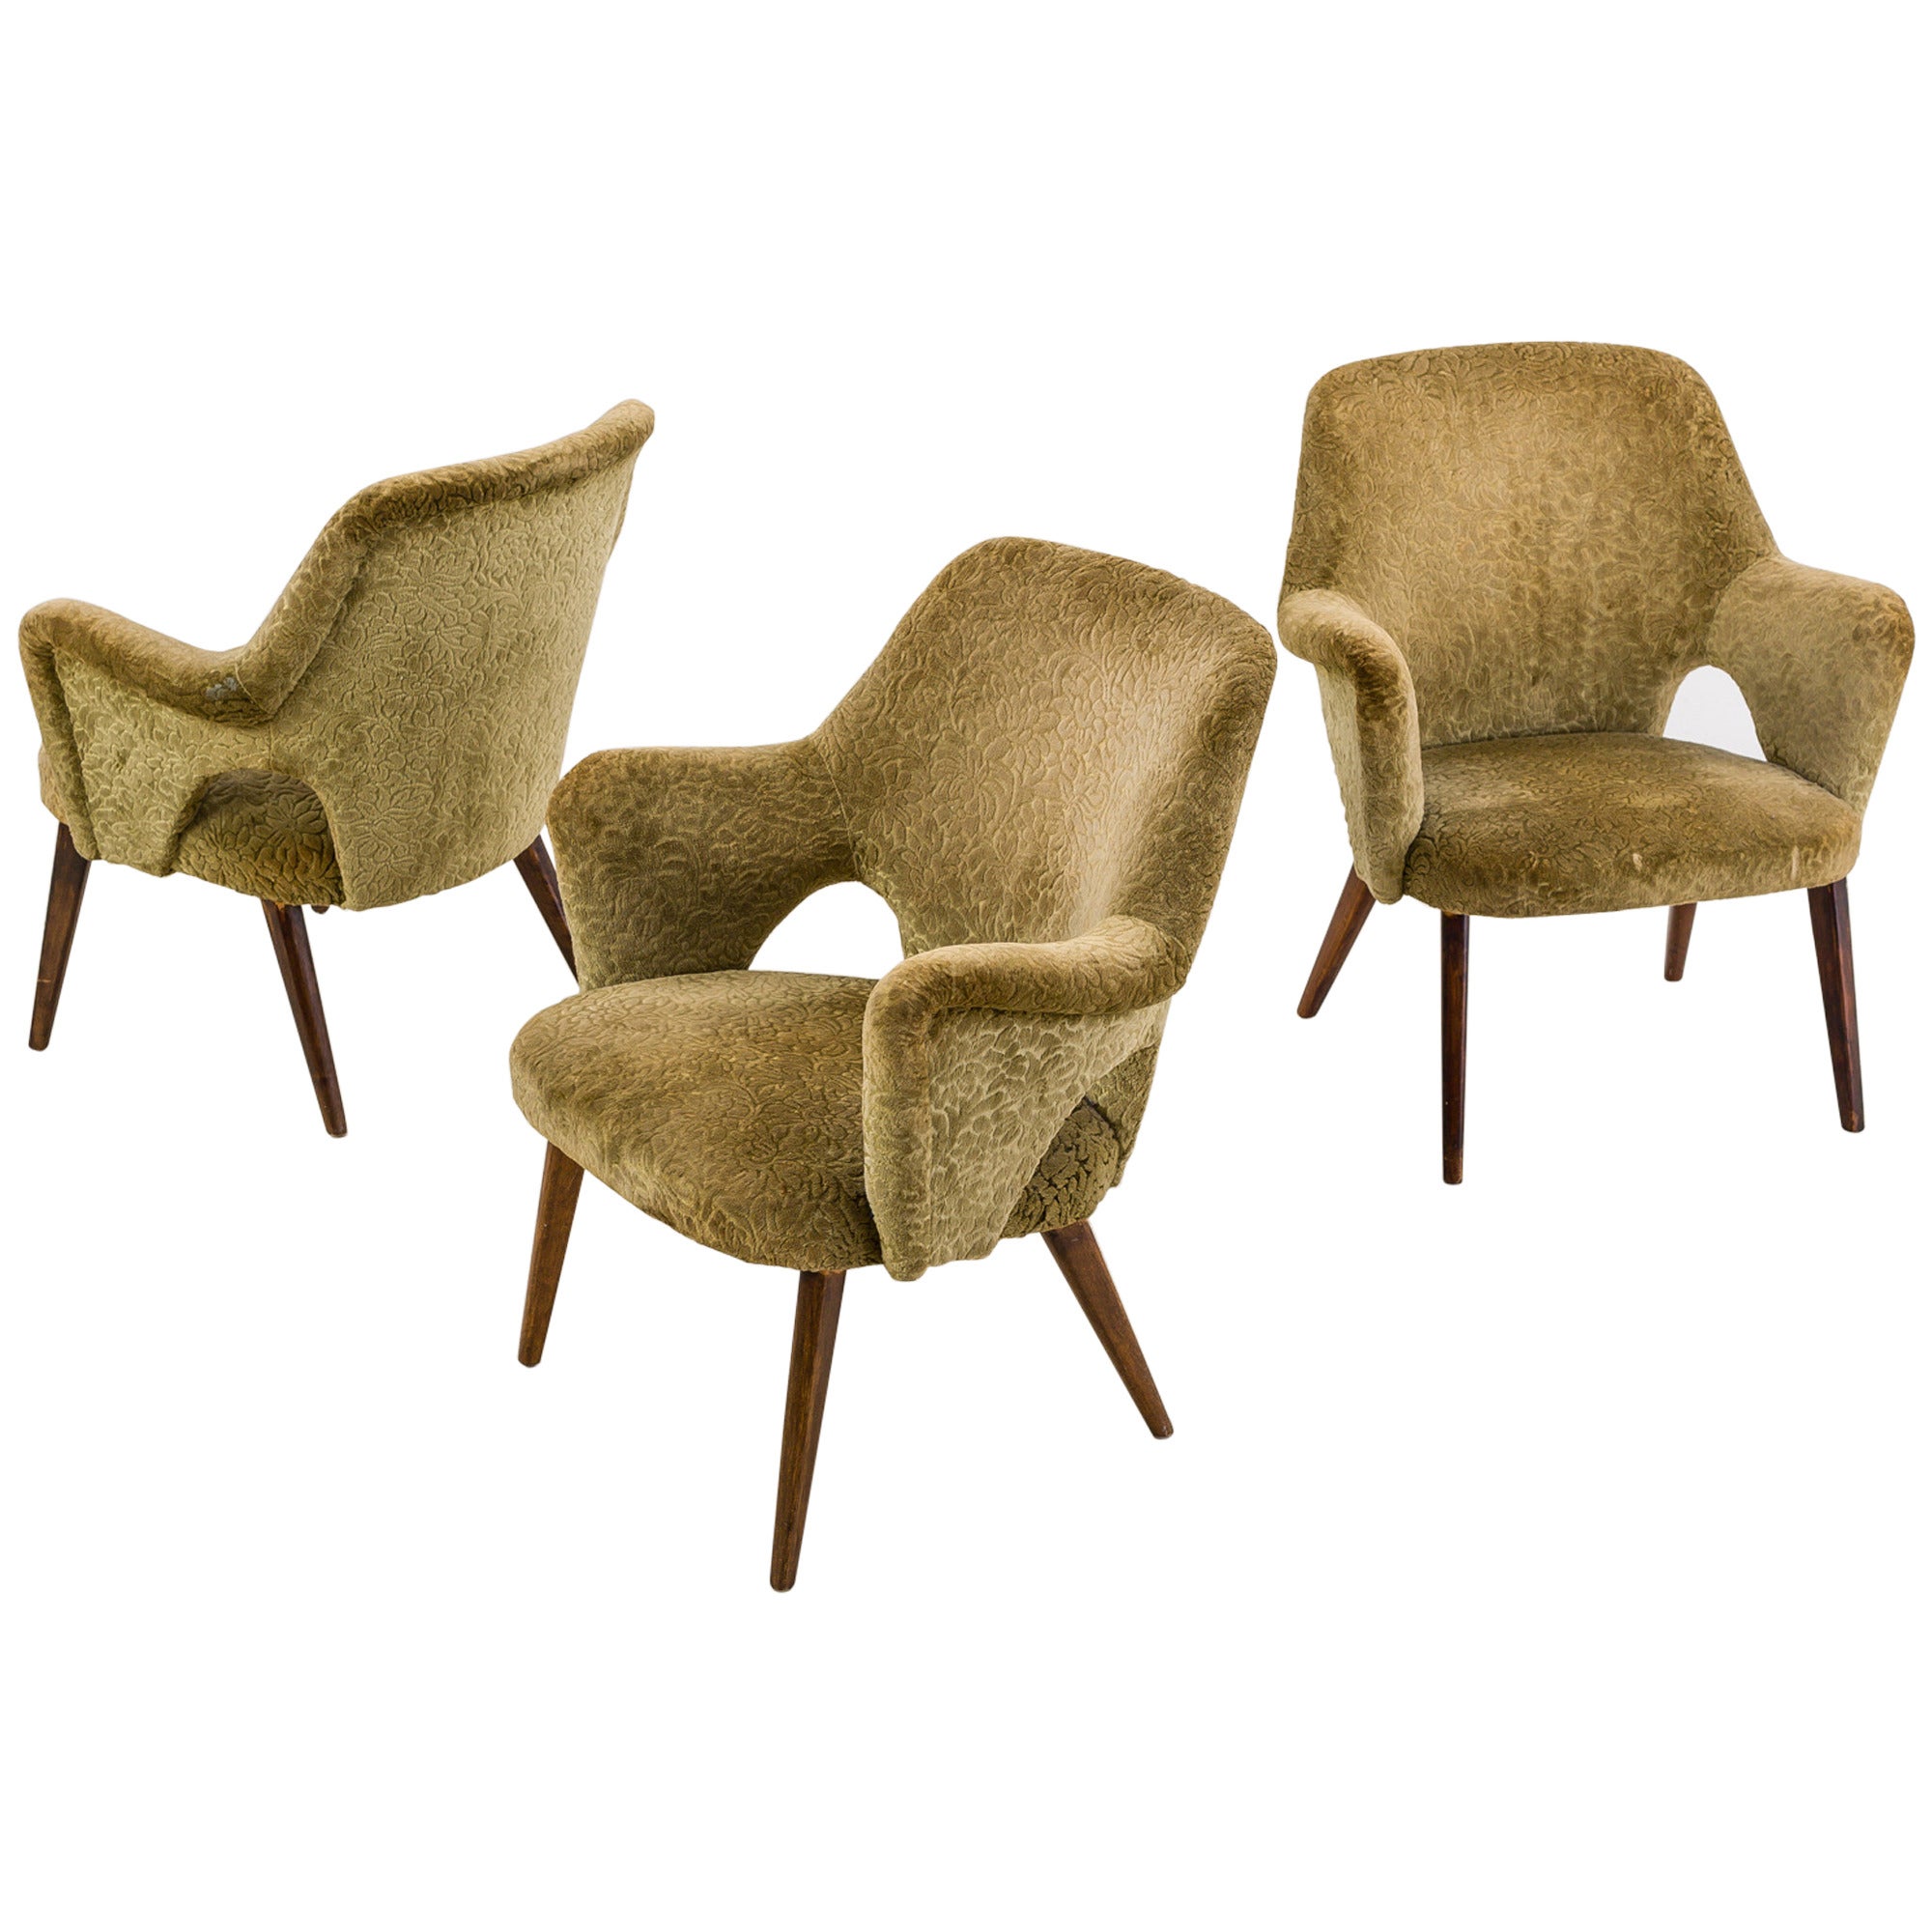 Three Carl-Gustav Hiort af Ornas Armchairs, Finland, 1950s For Sale